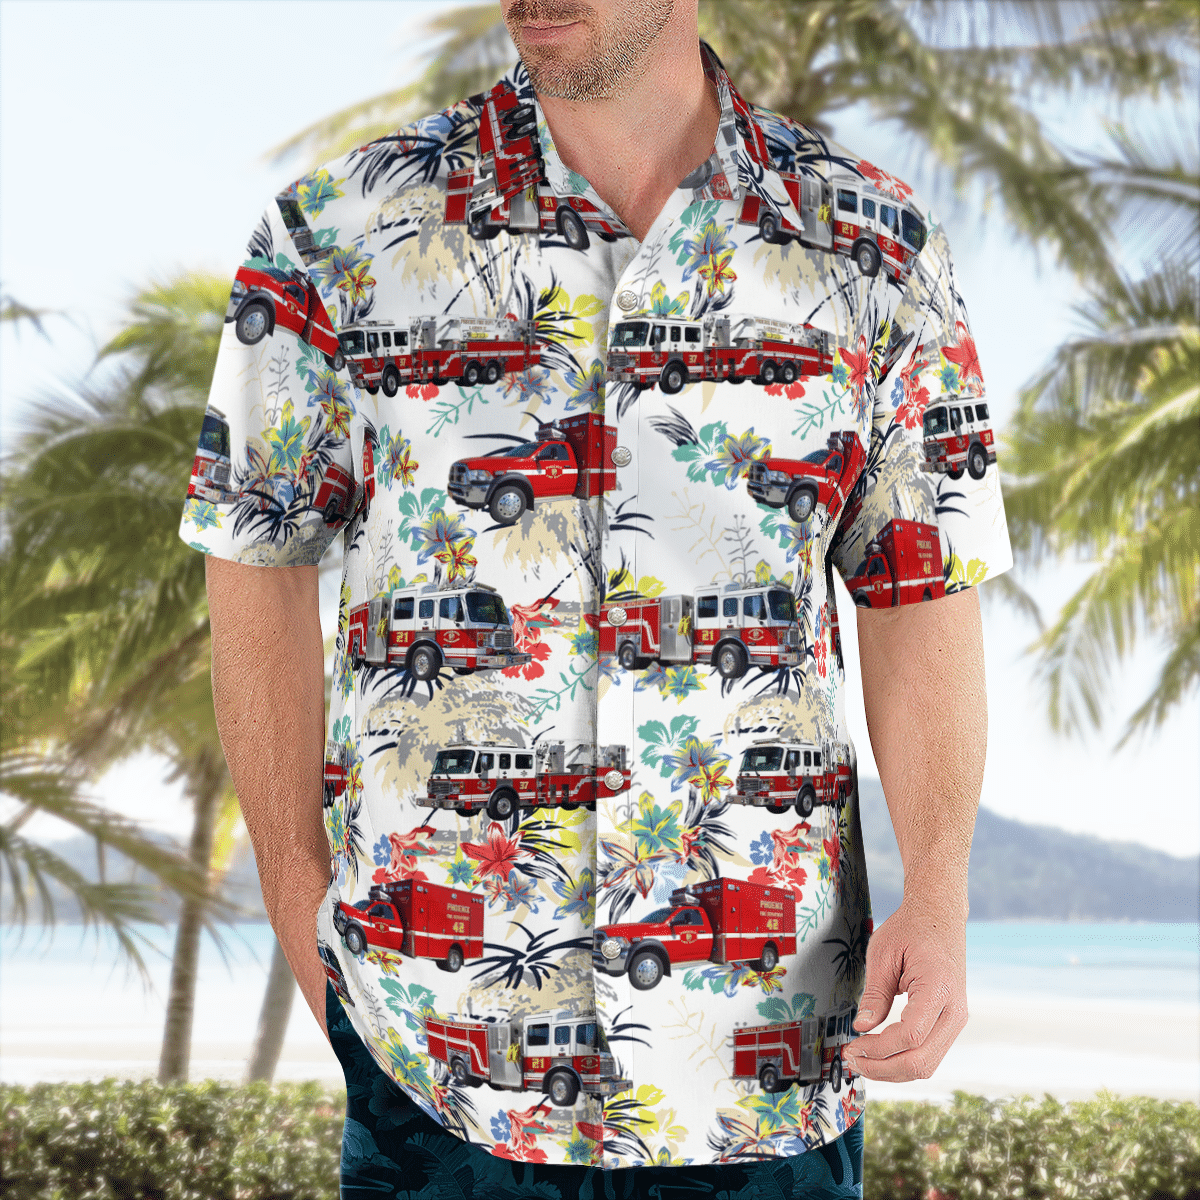 There are several styles of beach and Hawaiian shorts and tops to choose from 142